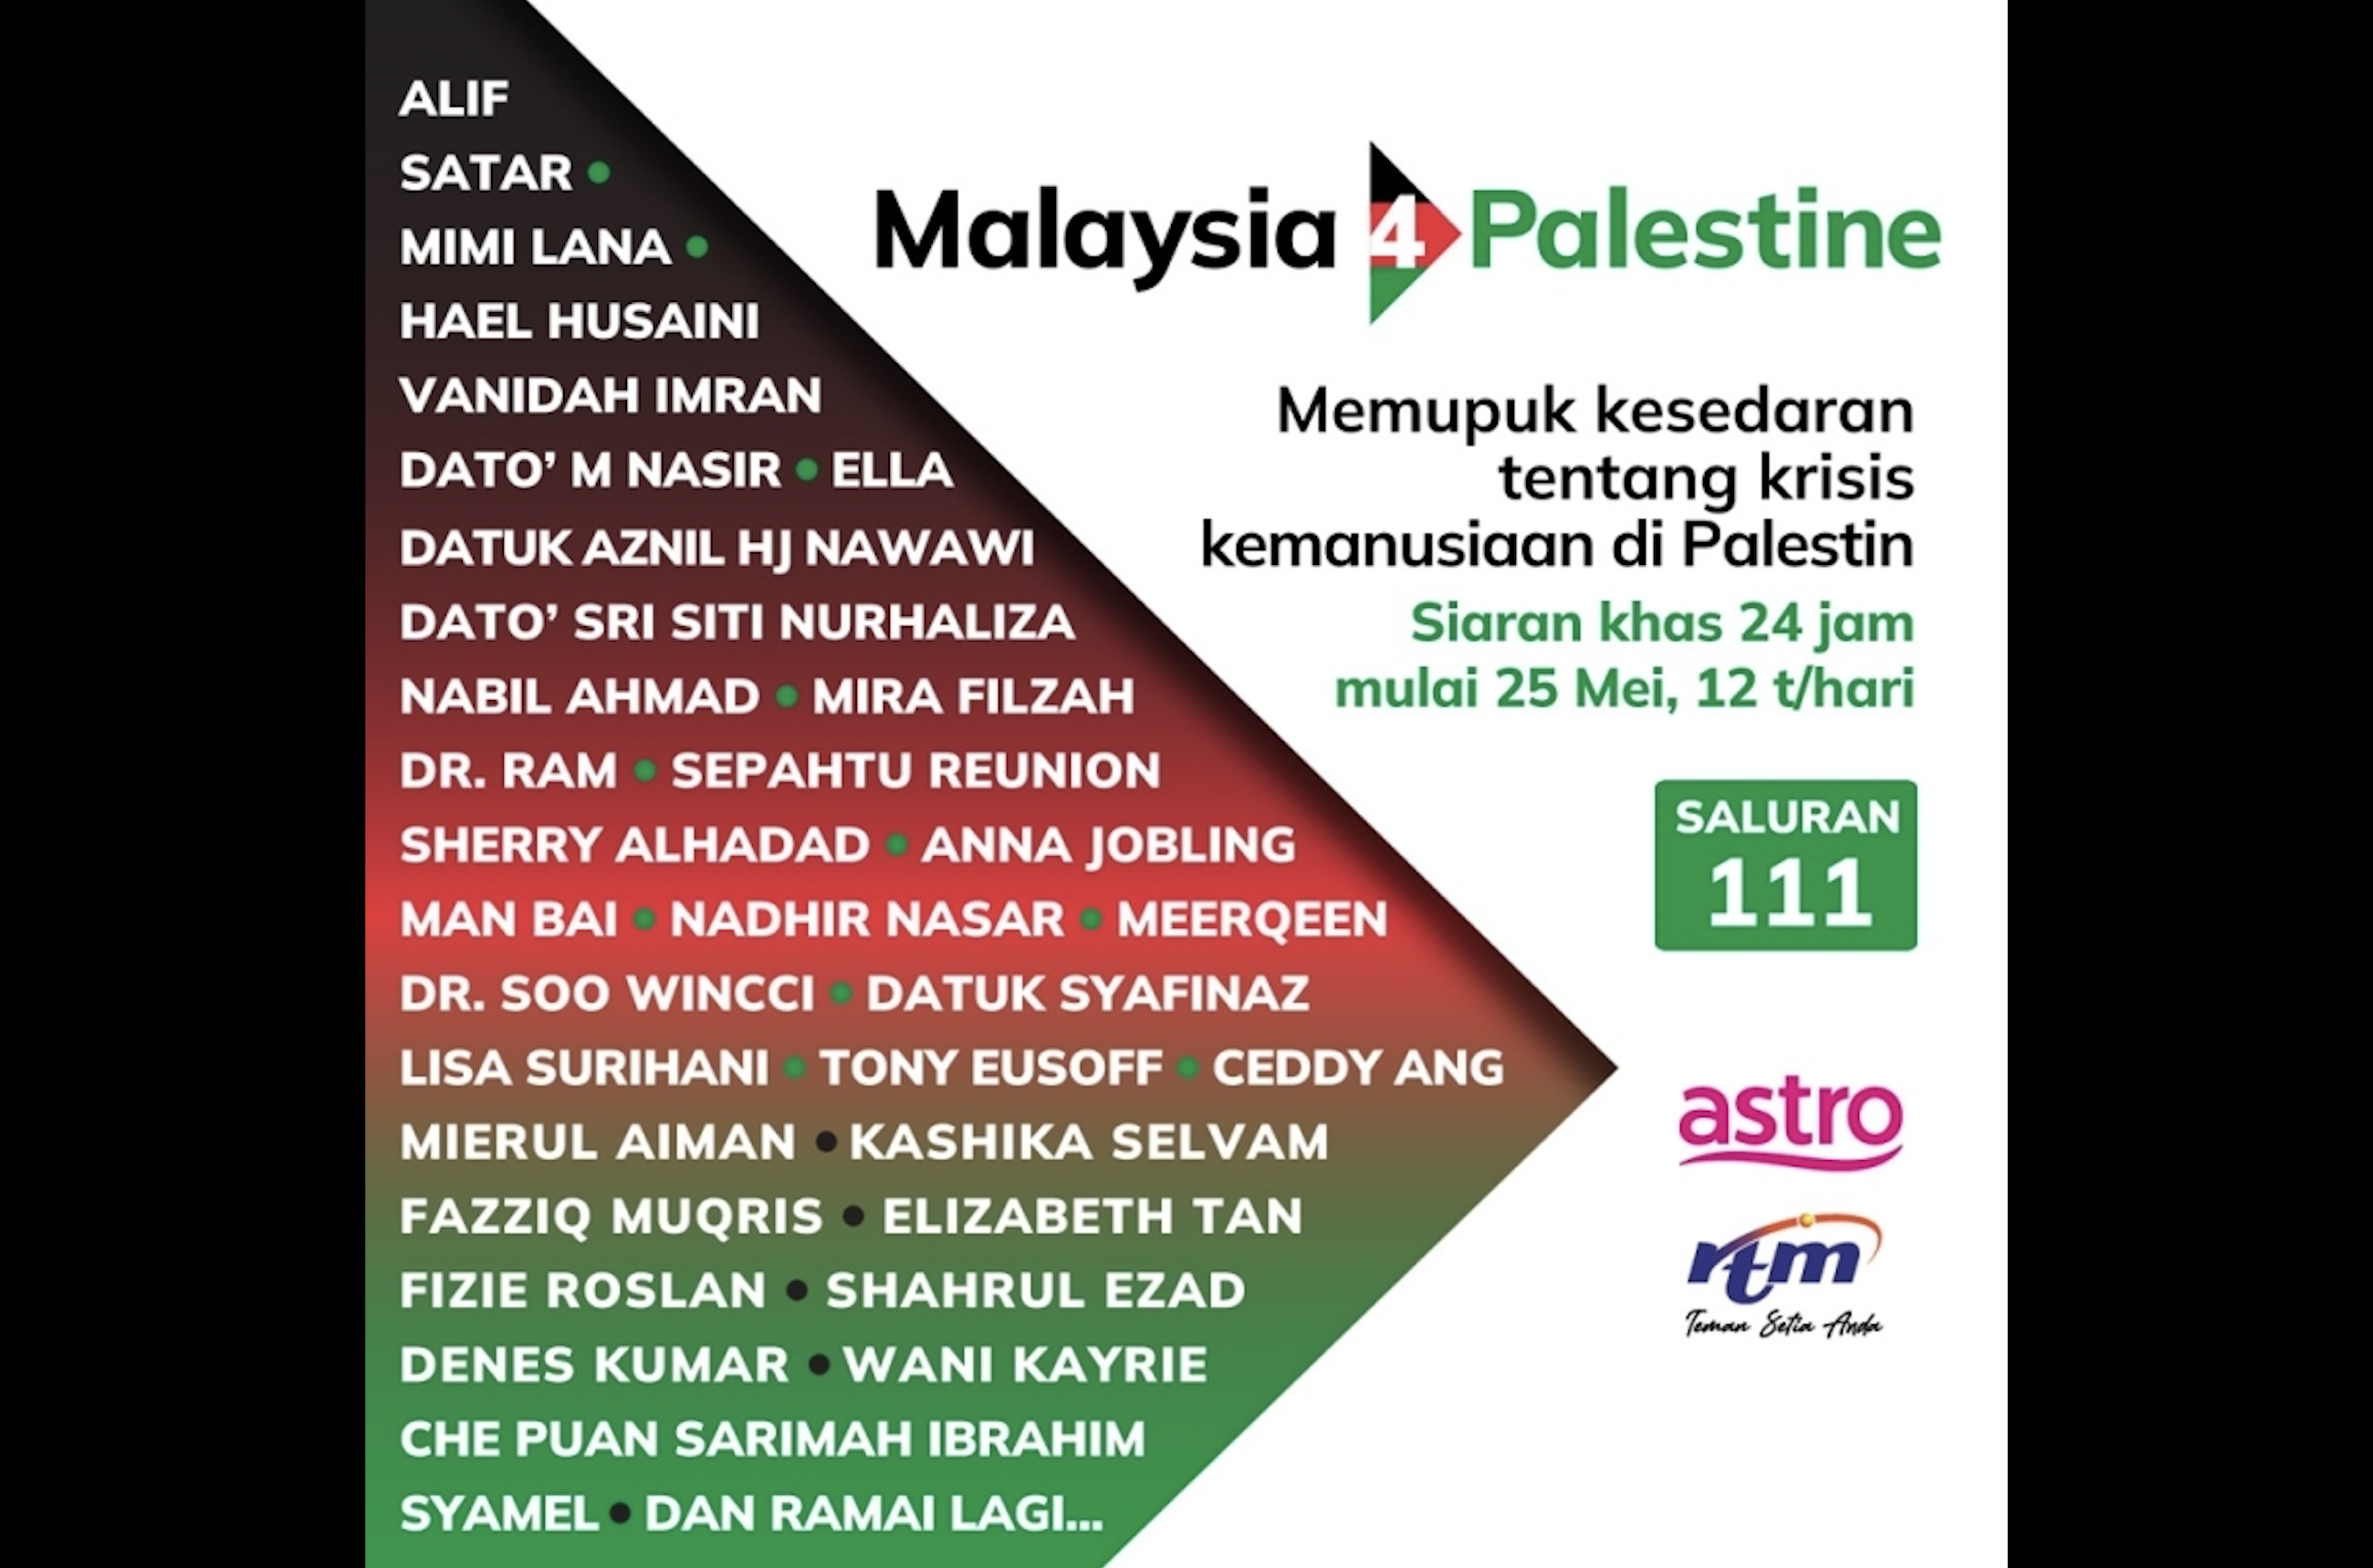 Malaysia4Palestine, a pop-up channel dedicated to the Palestinian cause premieres this weekend on Astro, RTM